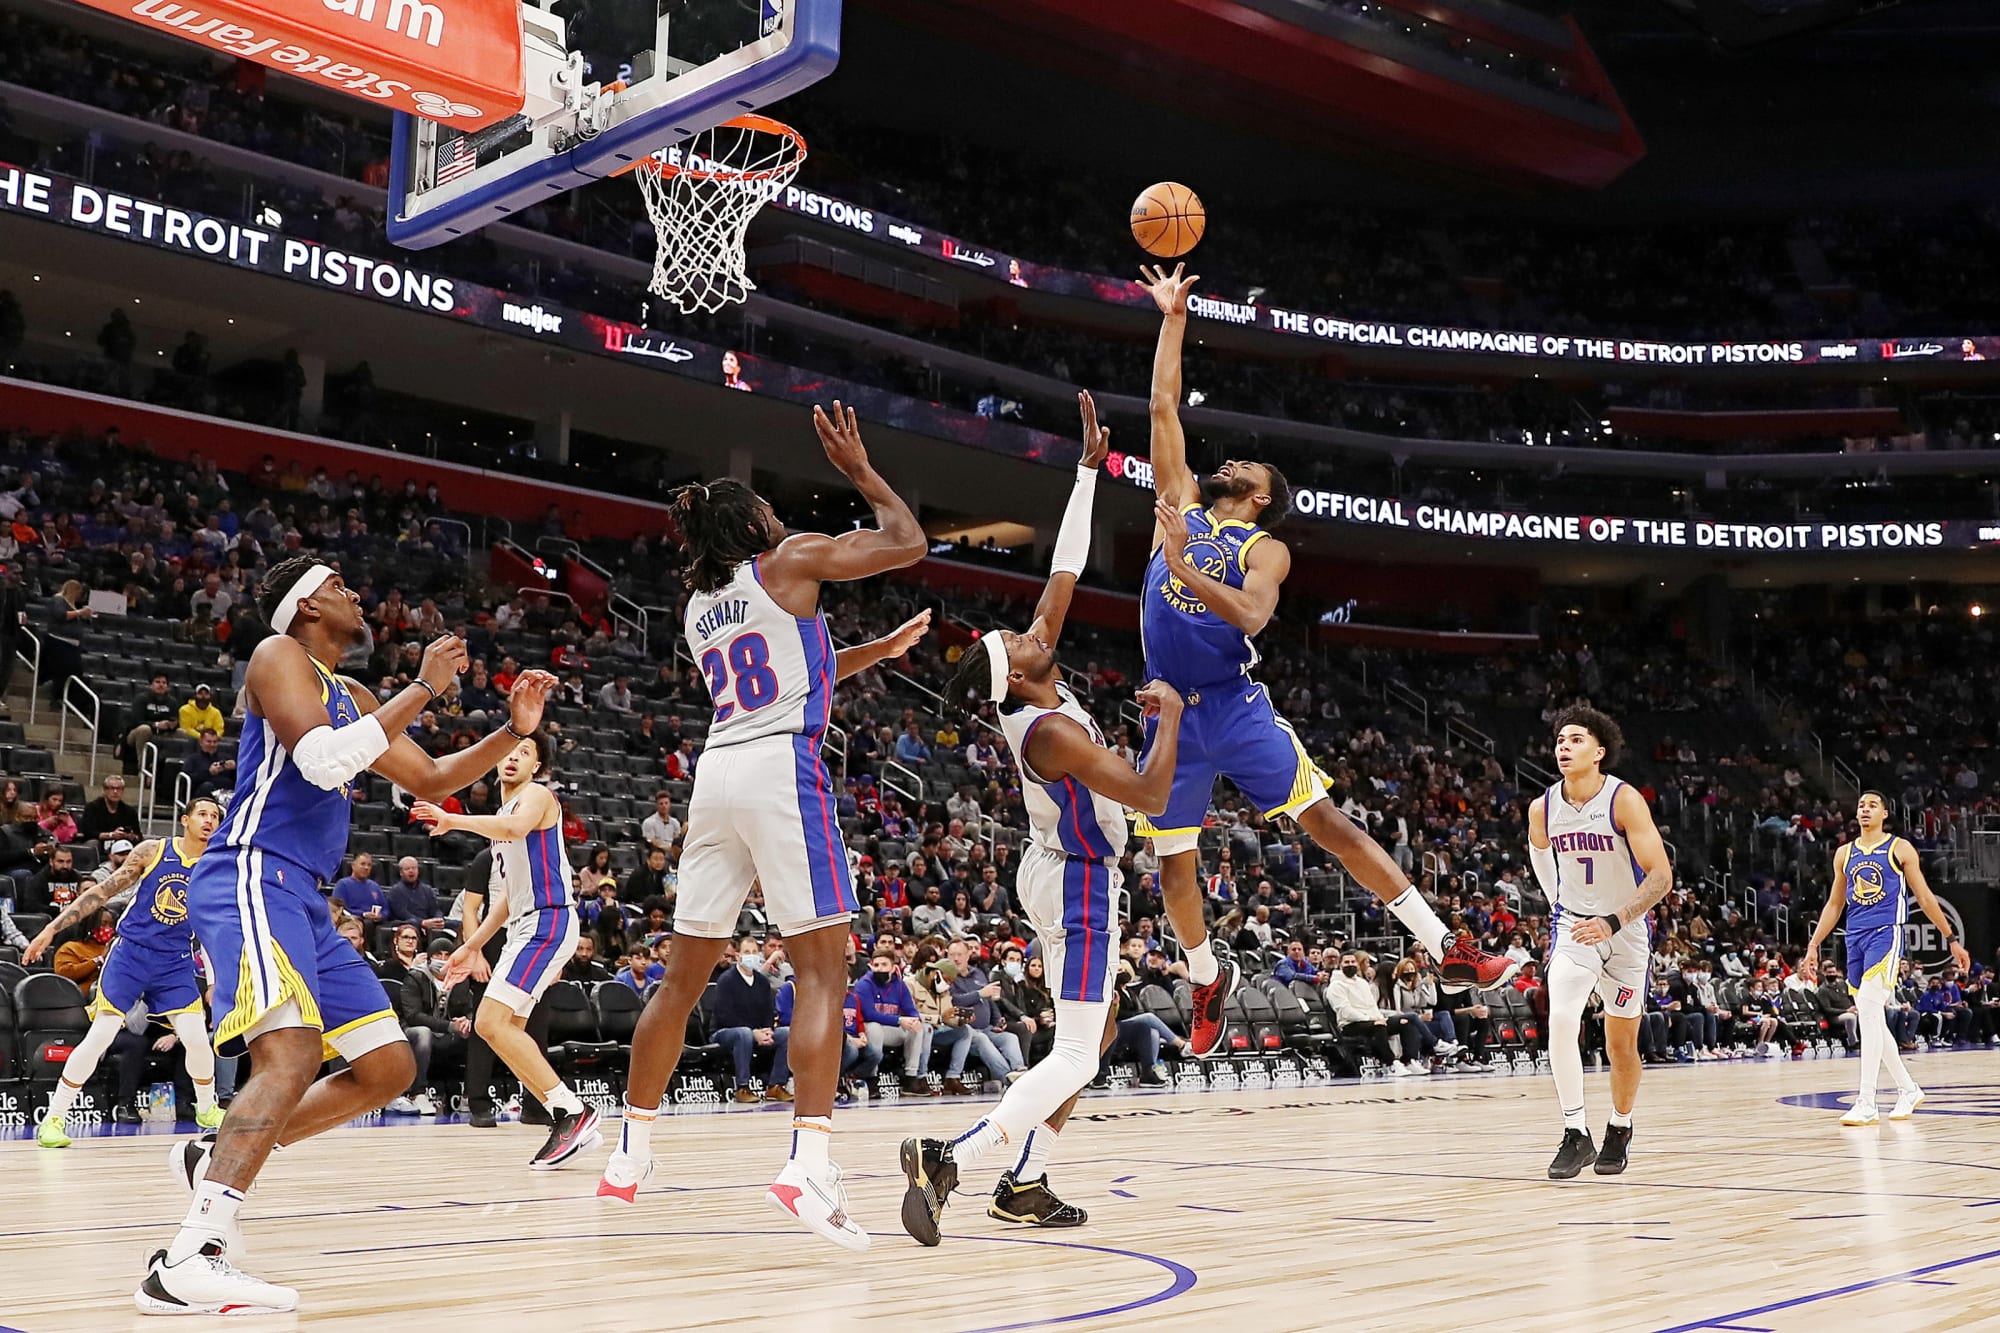 3 takeaways from the Detroit Pistons' embarrassing loss to Warriors